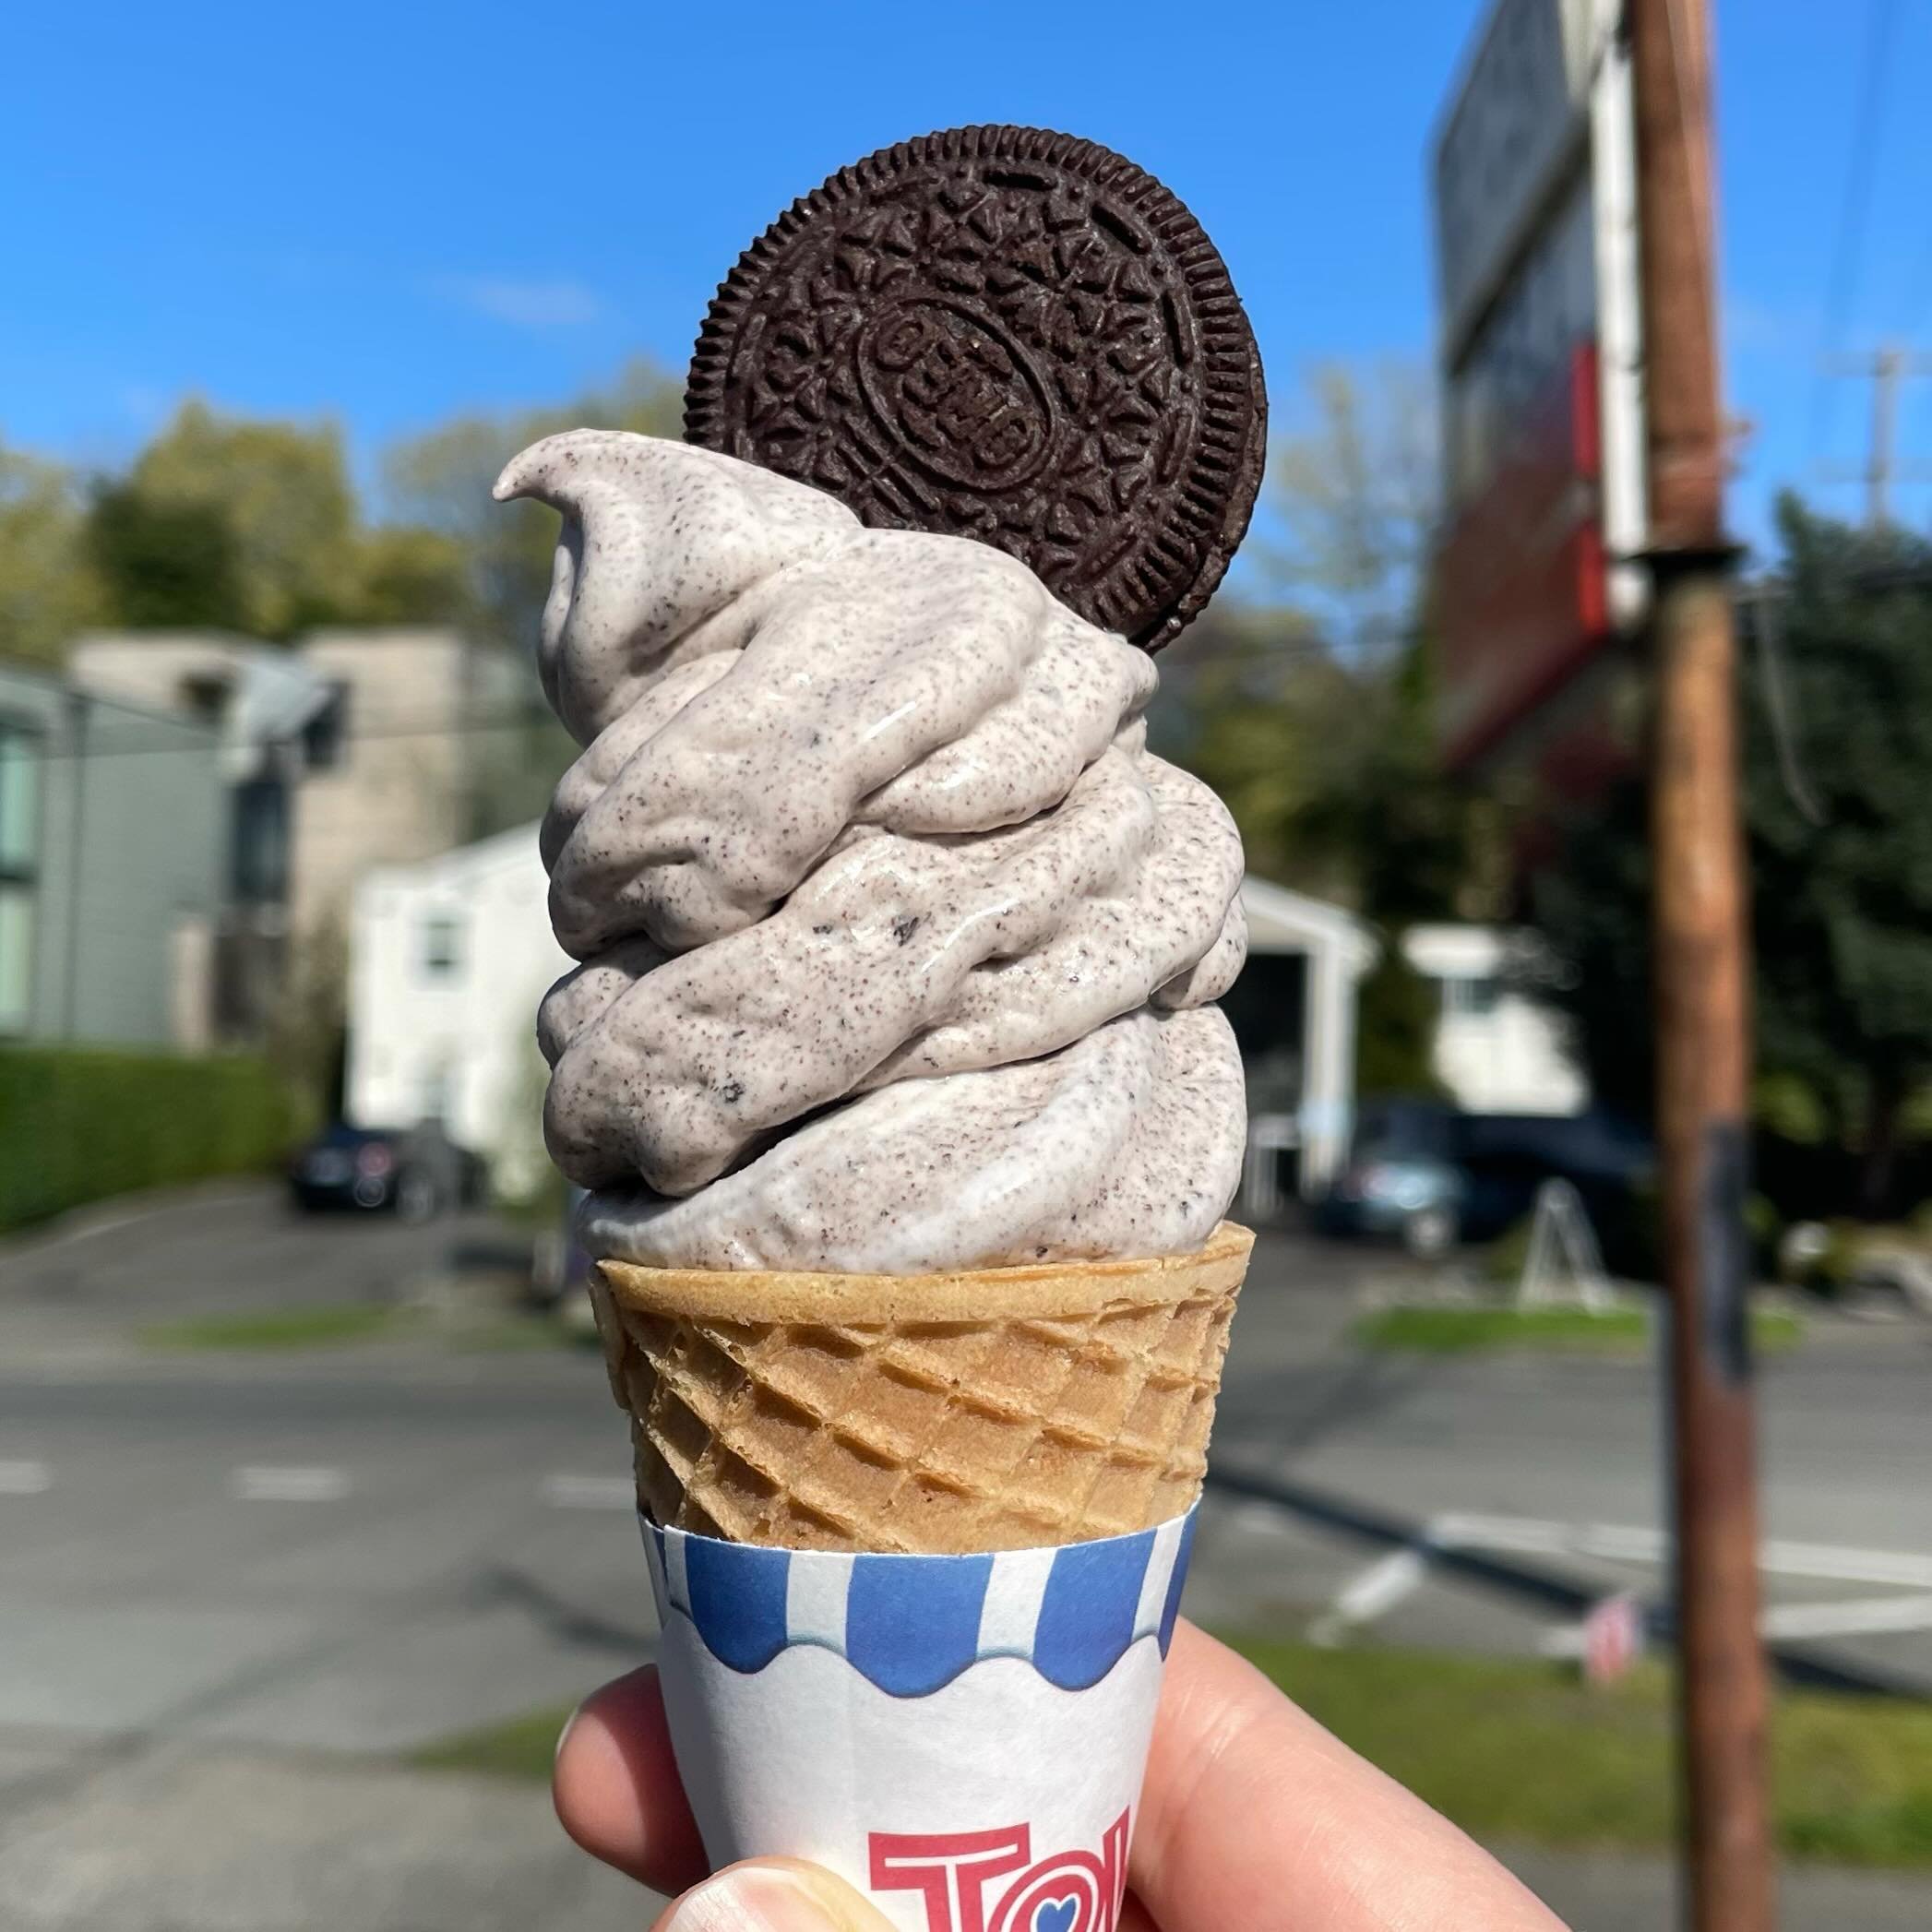 Oreo ready for this? Our newest seasonal ice cream flavor is Oreo! Try it blended into sweet cream for an awesome cookies &lsquo;n&rsquo; cream treat, or into coconut cream for a dairy free delight. Available for a limited time!

#NZxNW #newzealandst